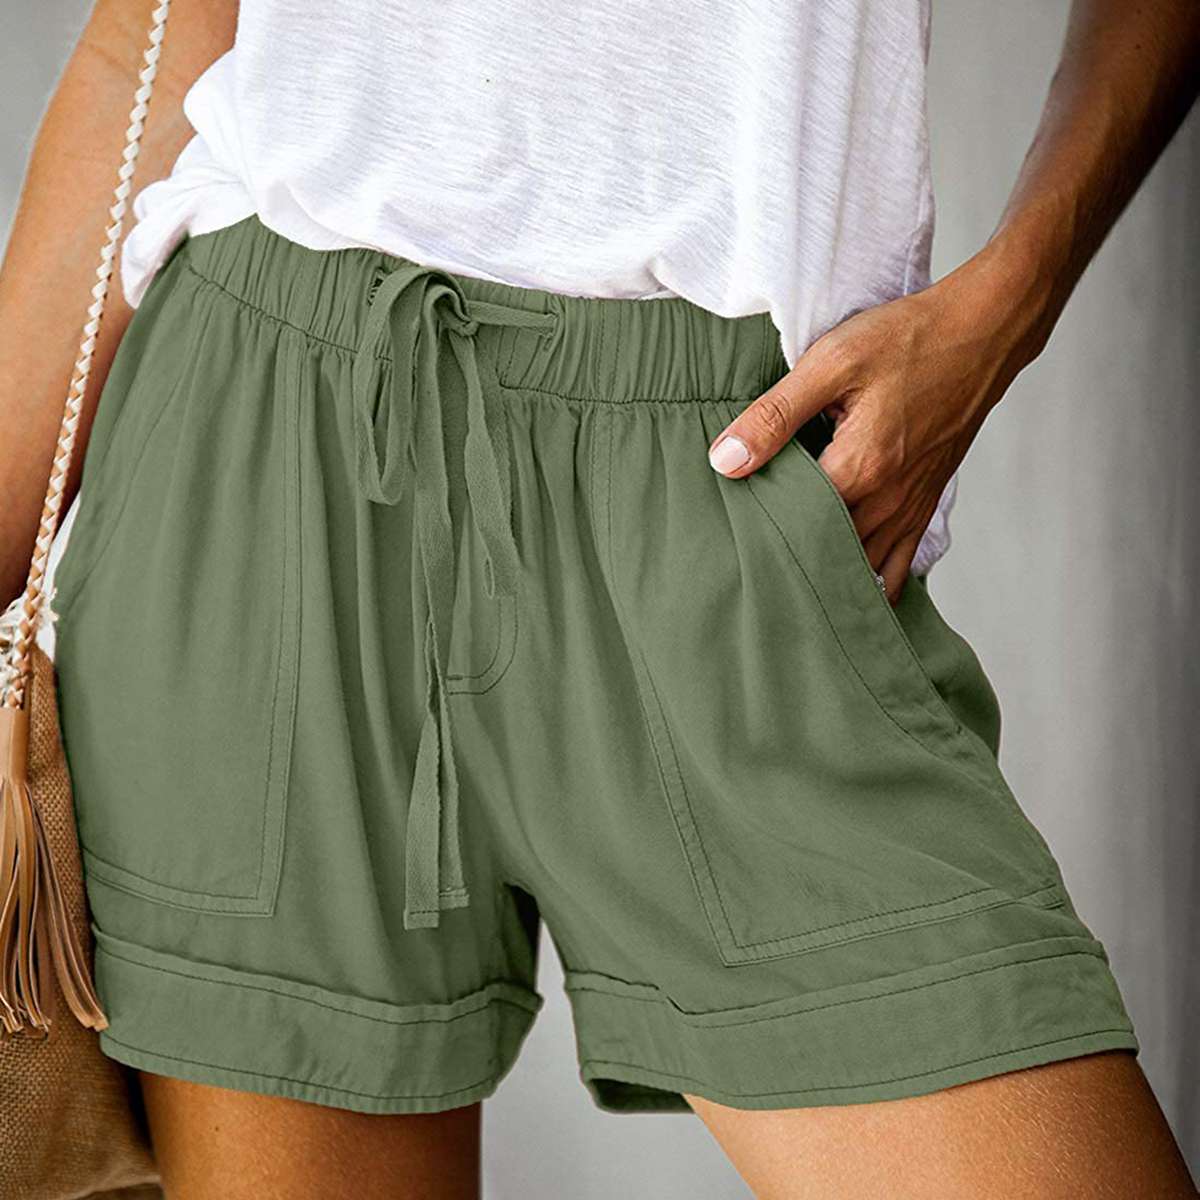 These Affordable Shorts Have So Many Comfortable Features | Travel ...